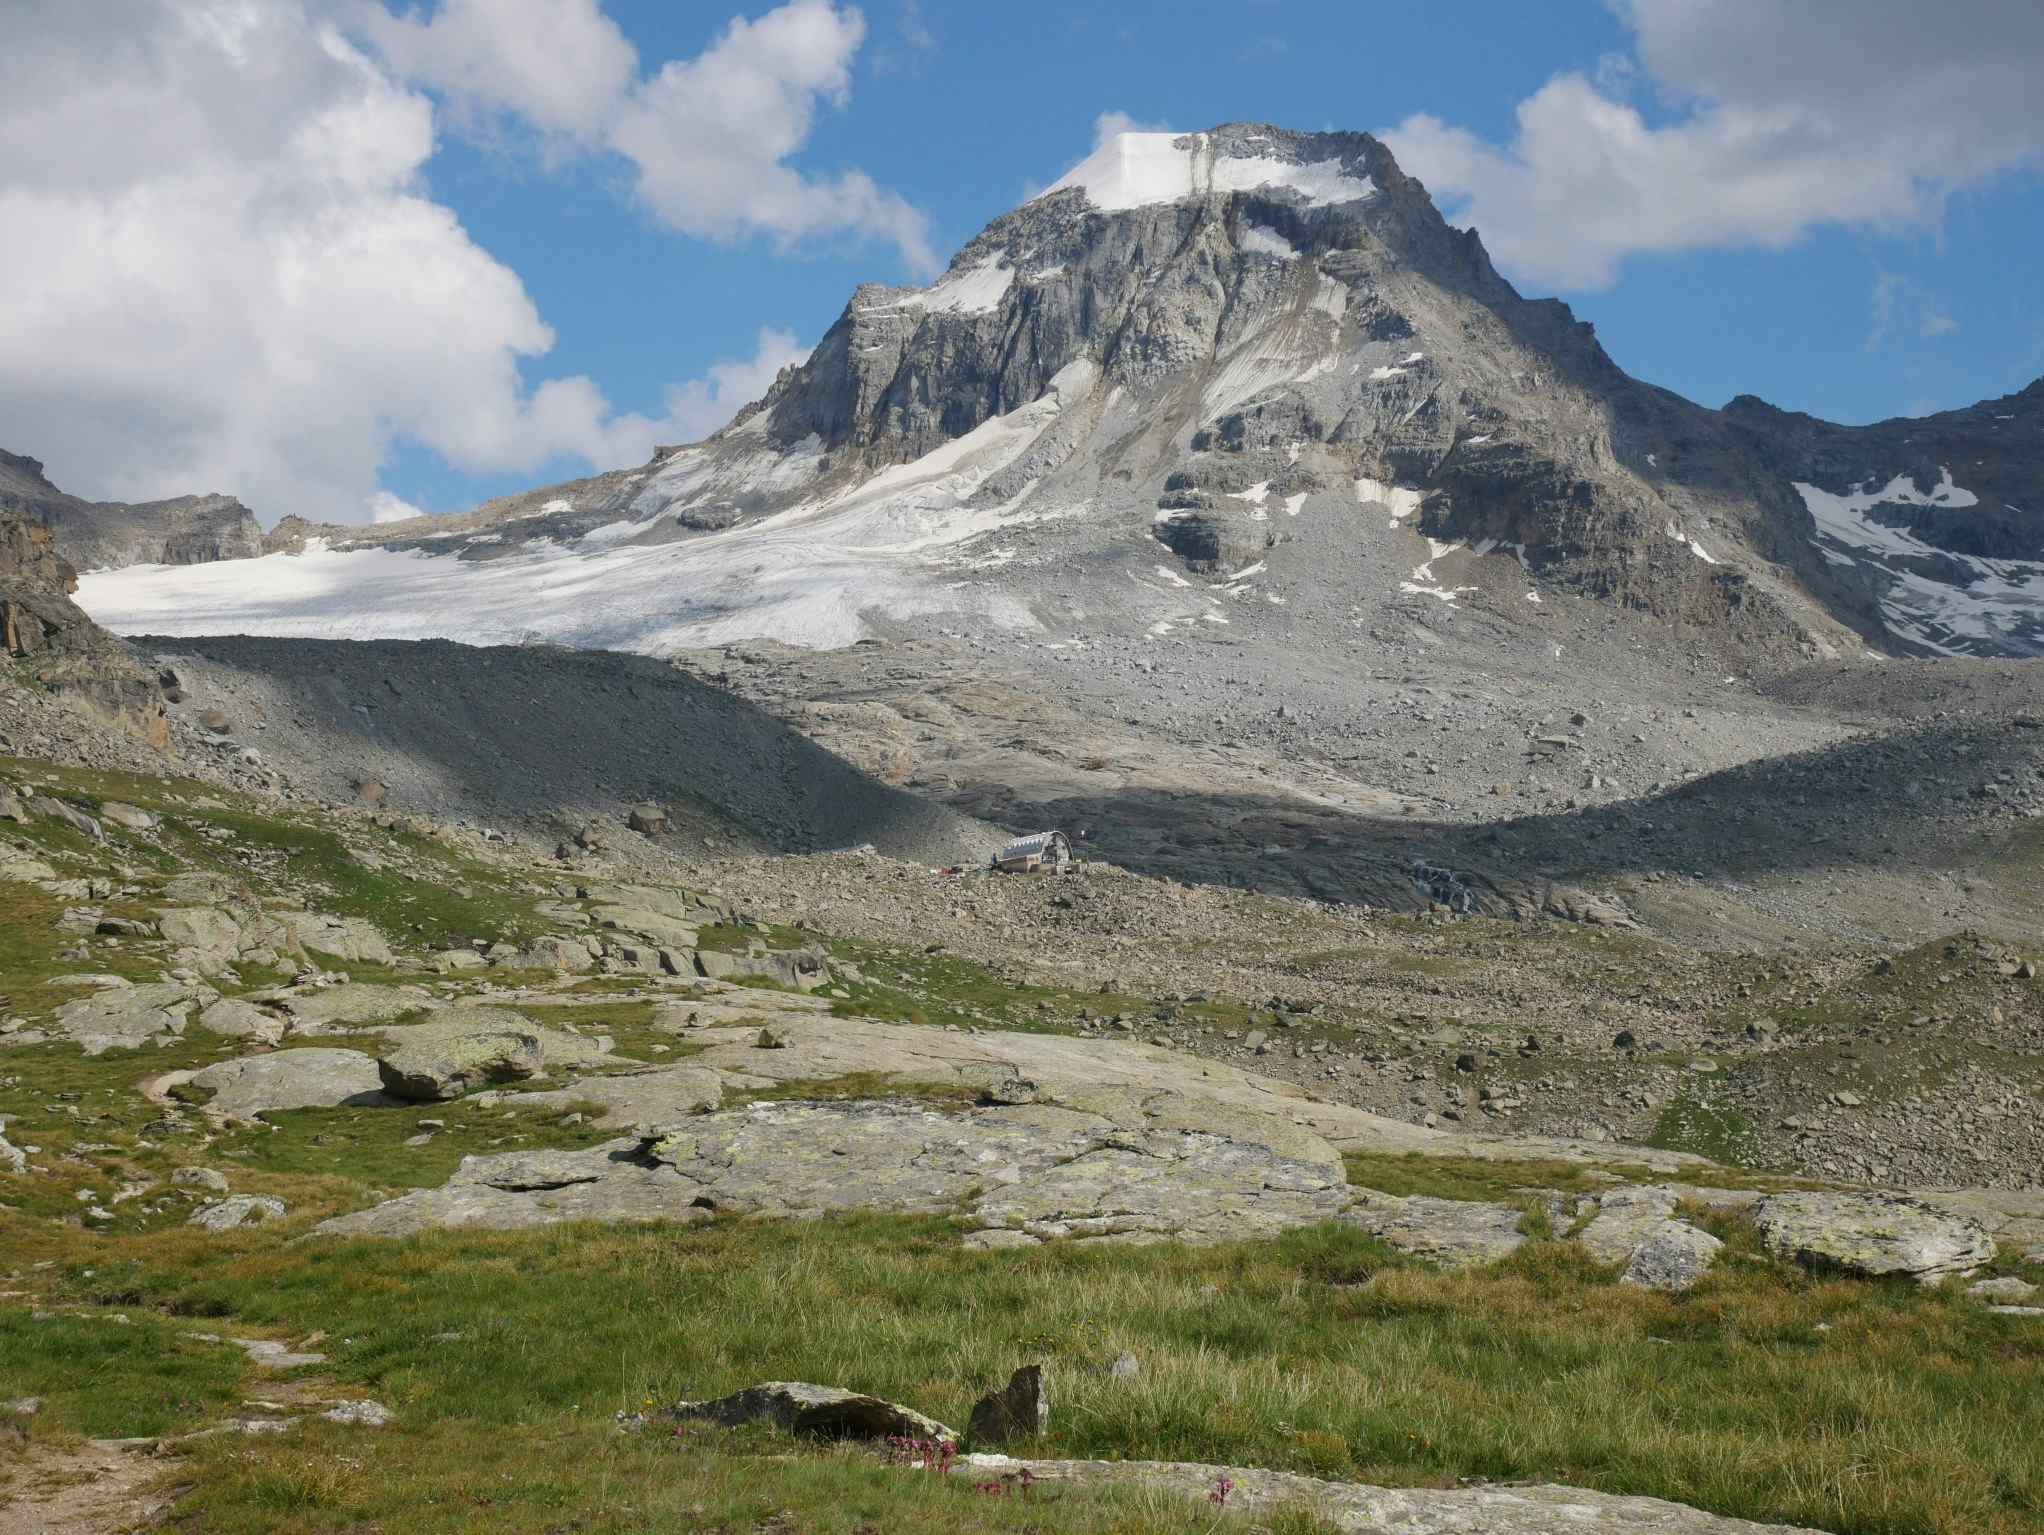 Rifugio Vittorio Emanuele II at the base of Gran Paradiso, Italy. Photo: Kirsty Holmes/Much Better Adventures